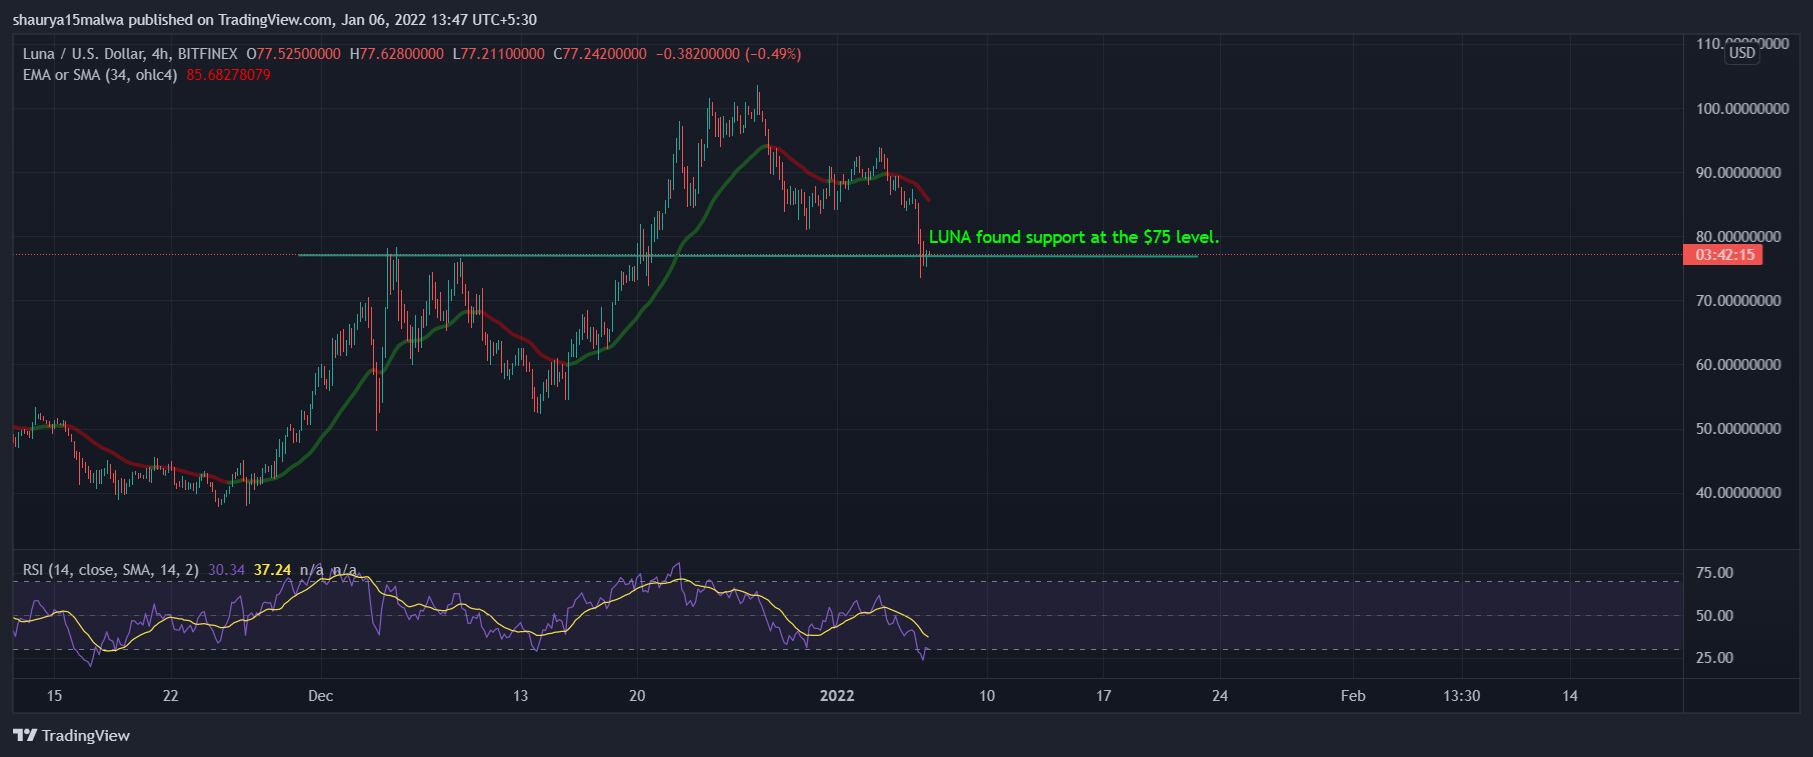 LUNA support levels and RSI readings. (TradingView)